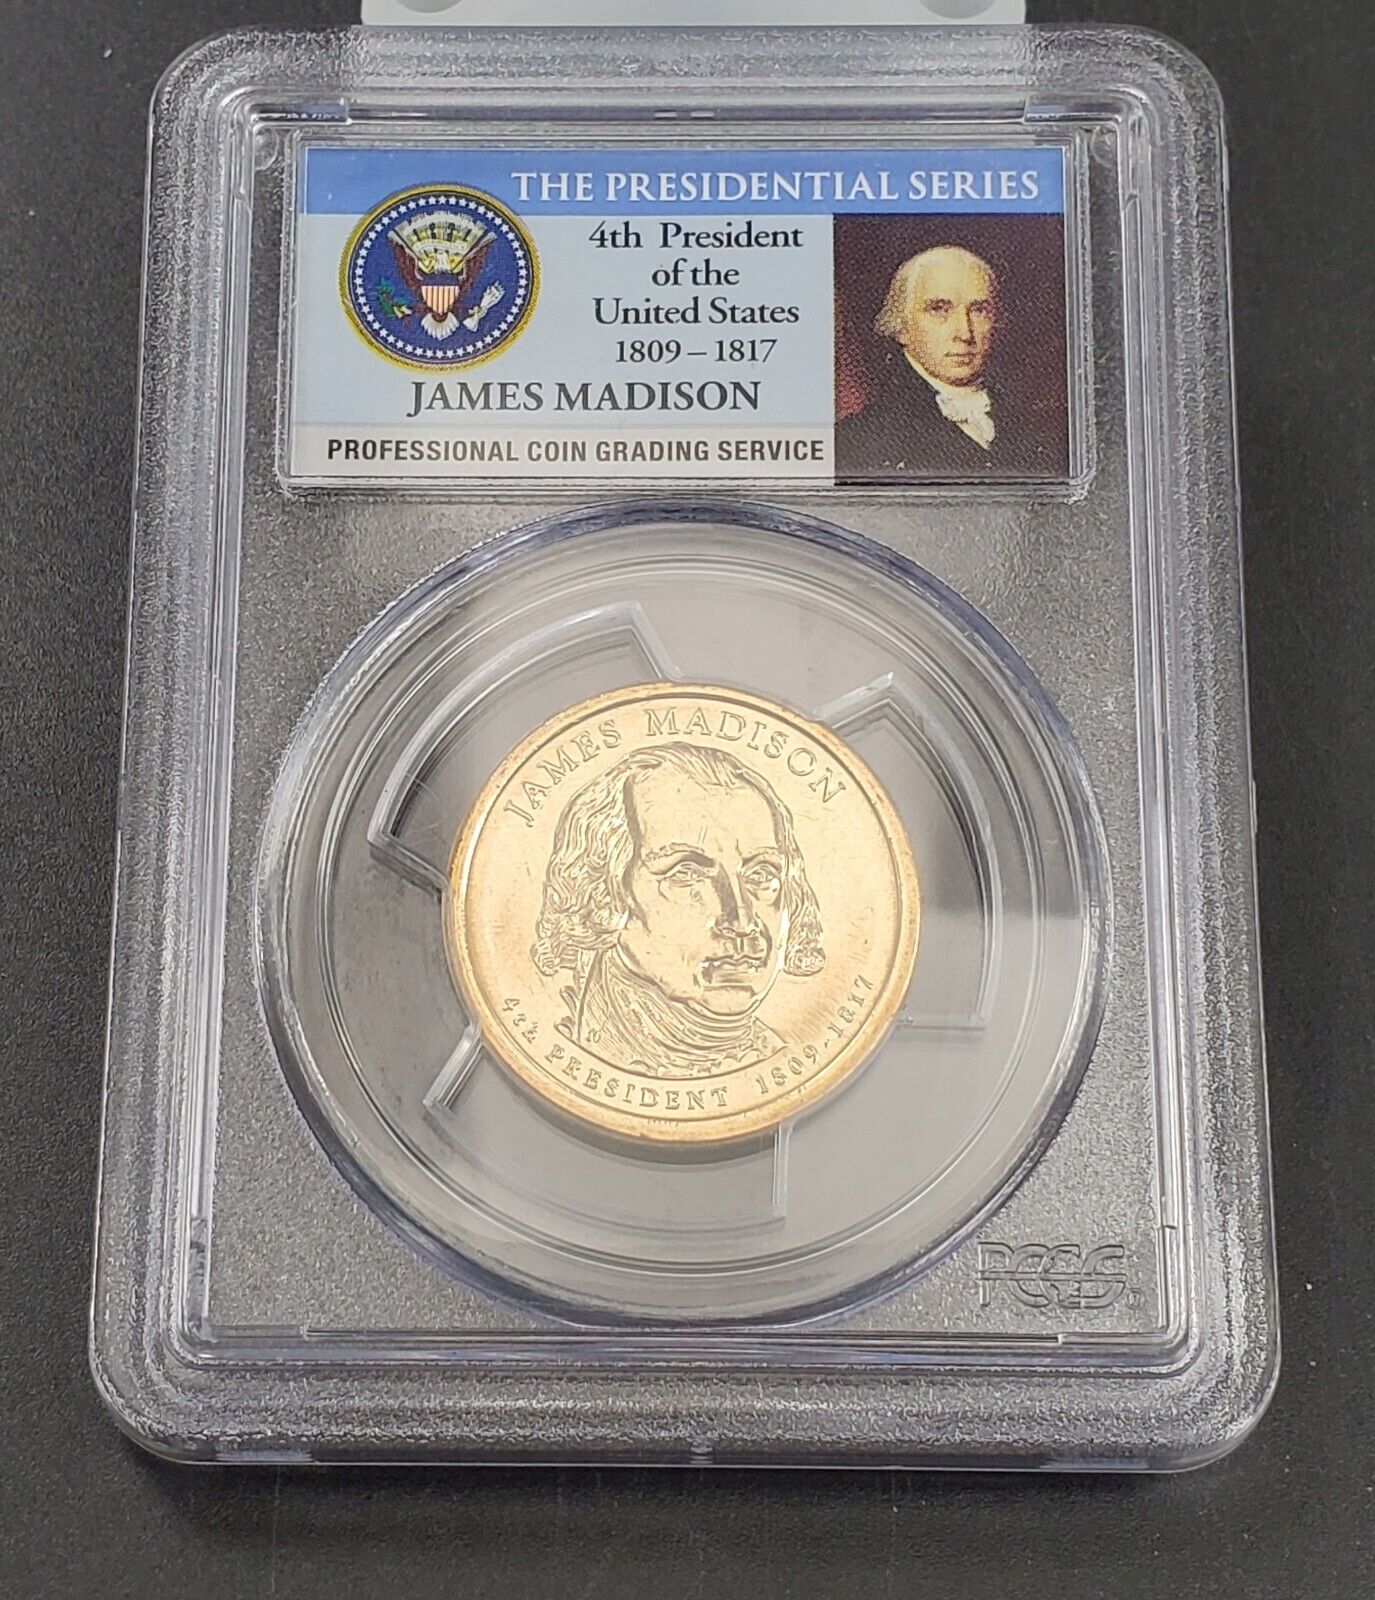 2007 P James Madison Presidential PCGS FDOI BU First Day of issue A Position